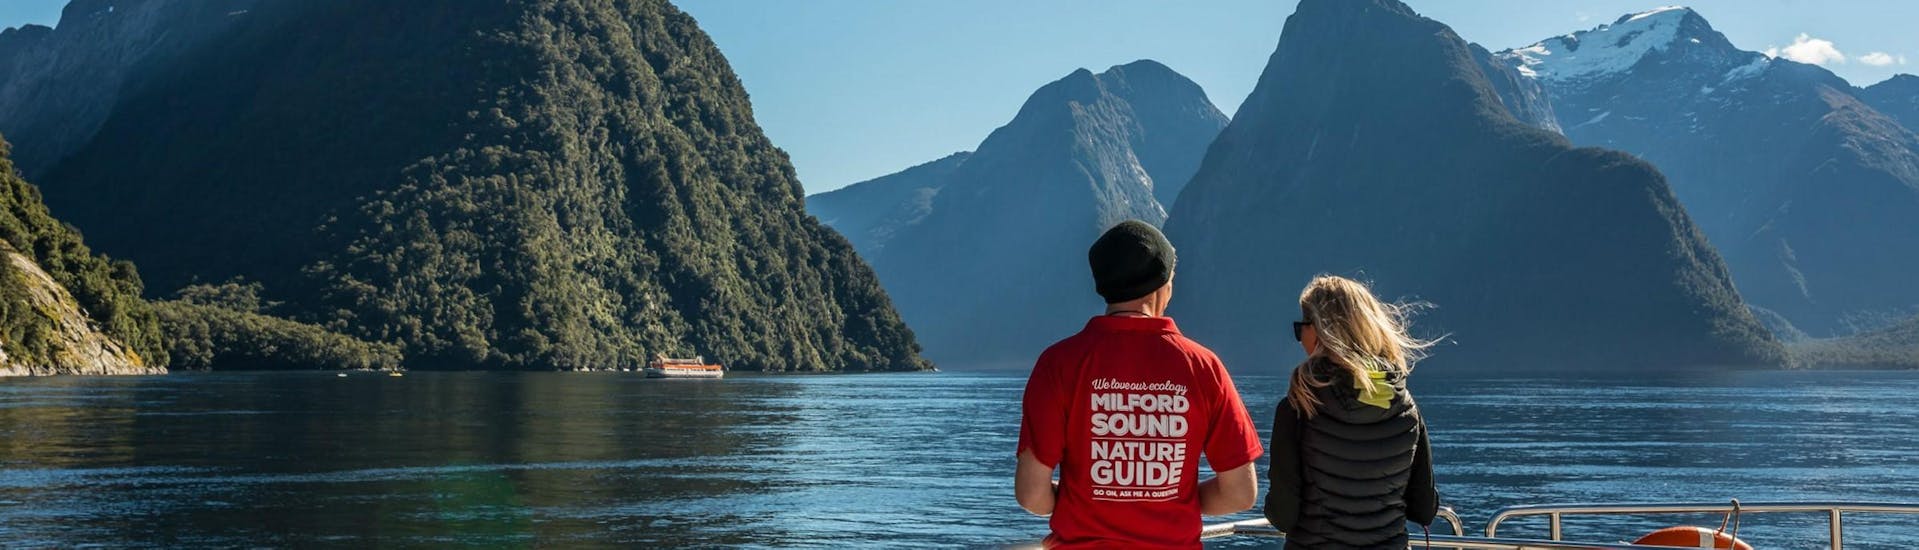 A nature guide and a passenger are taking in the spectacular scenery from the viewing deck of a Southern Discoveries catamaran during their Milford Sound Nature Day Trip from Queenstown.